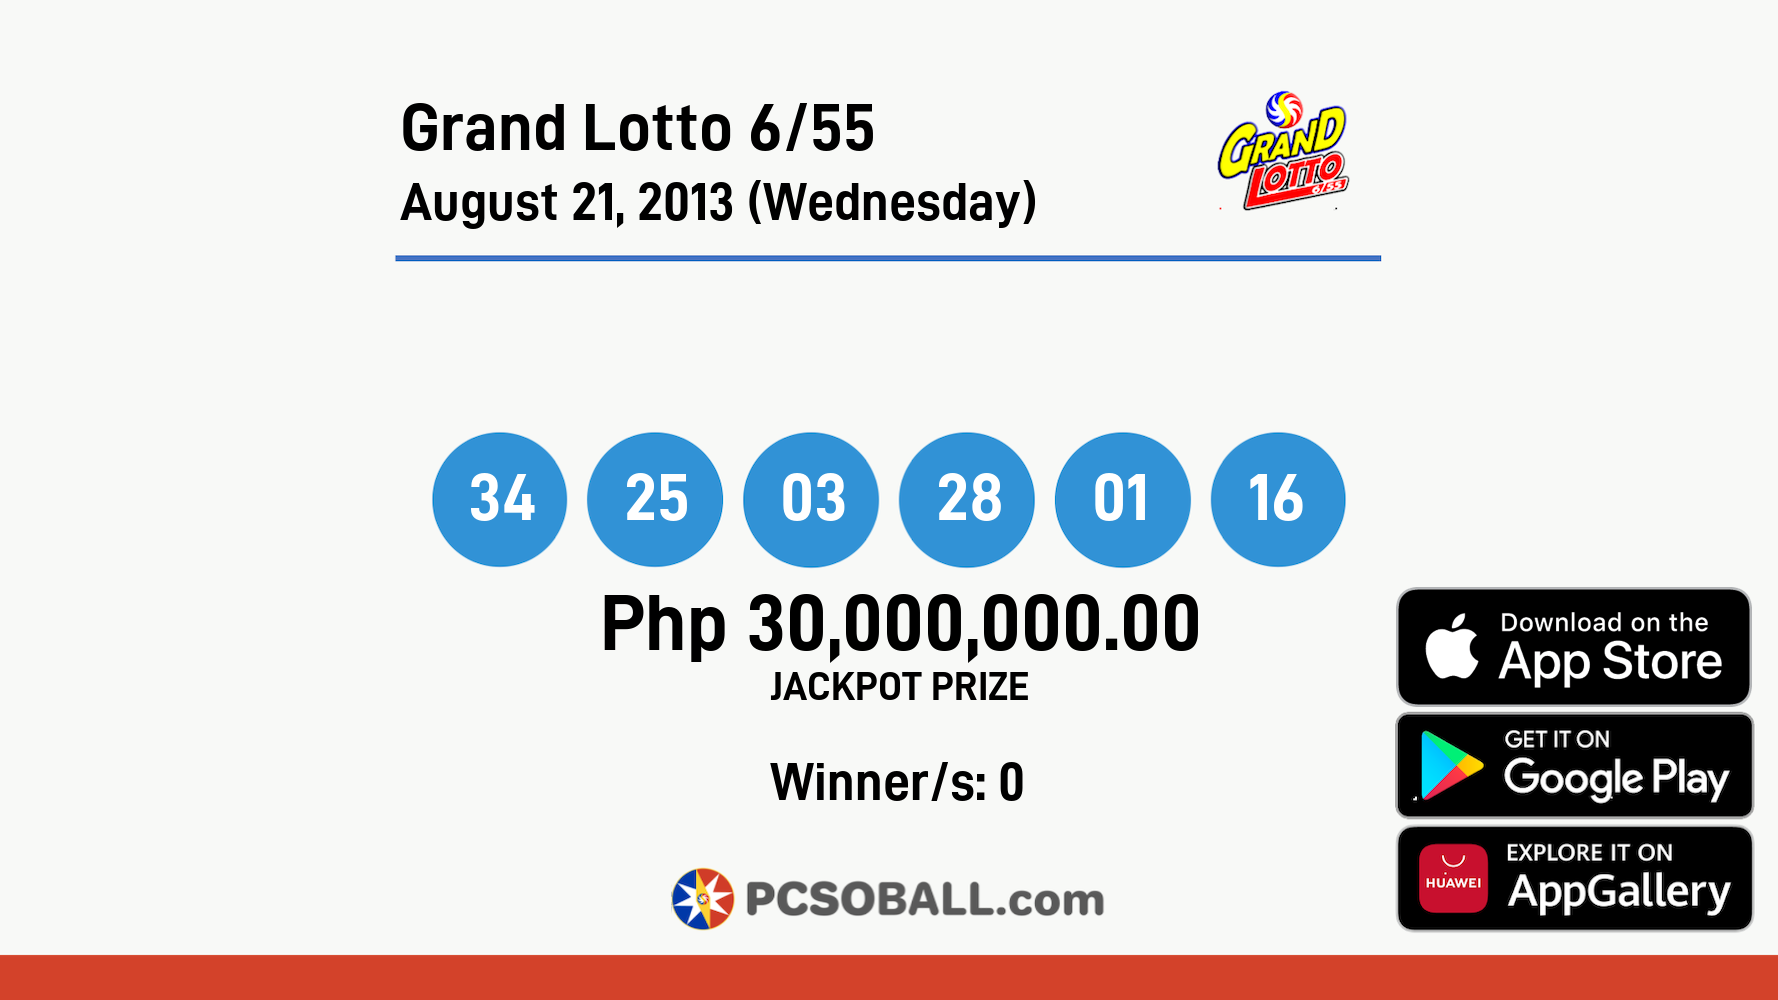 Grand Lotto 6/55 August 21, 2013 (Wednesday) Result